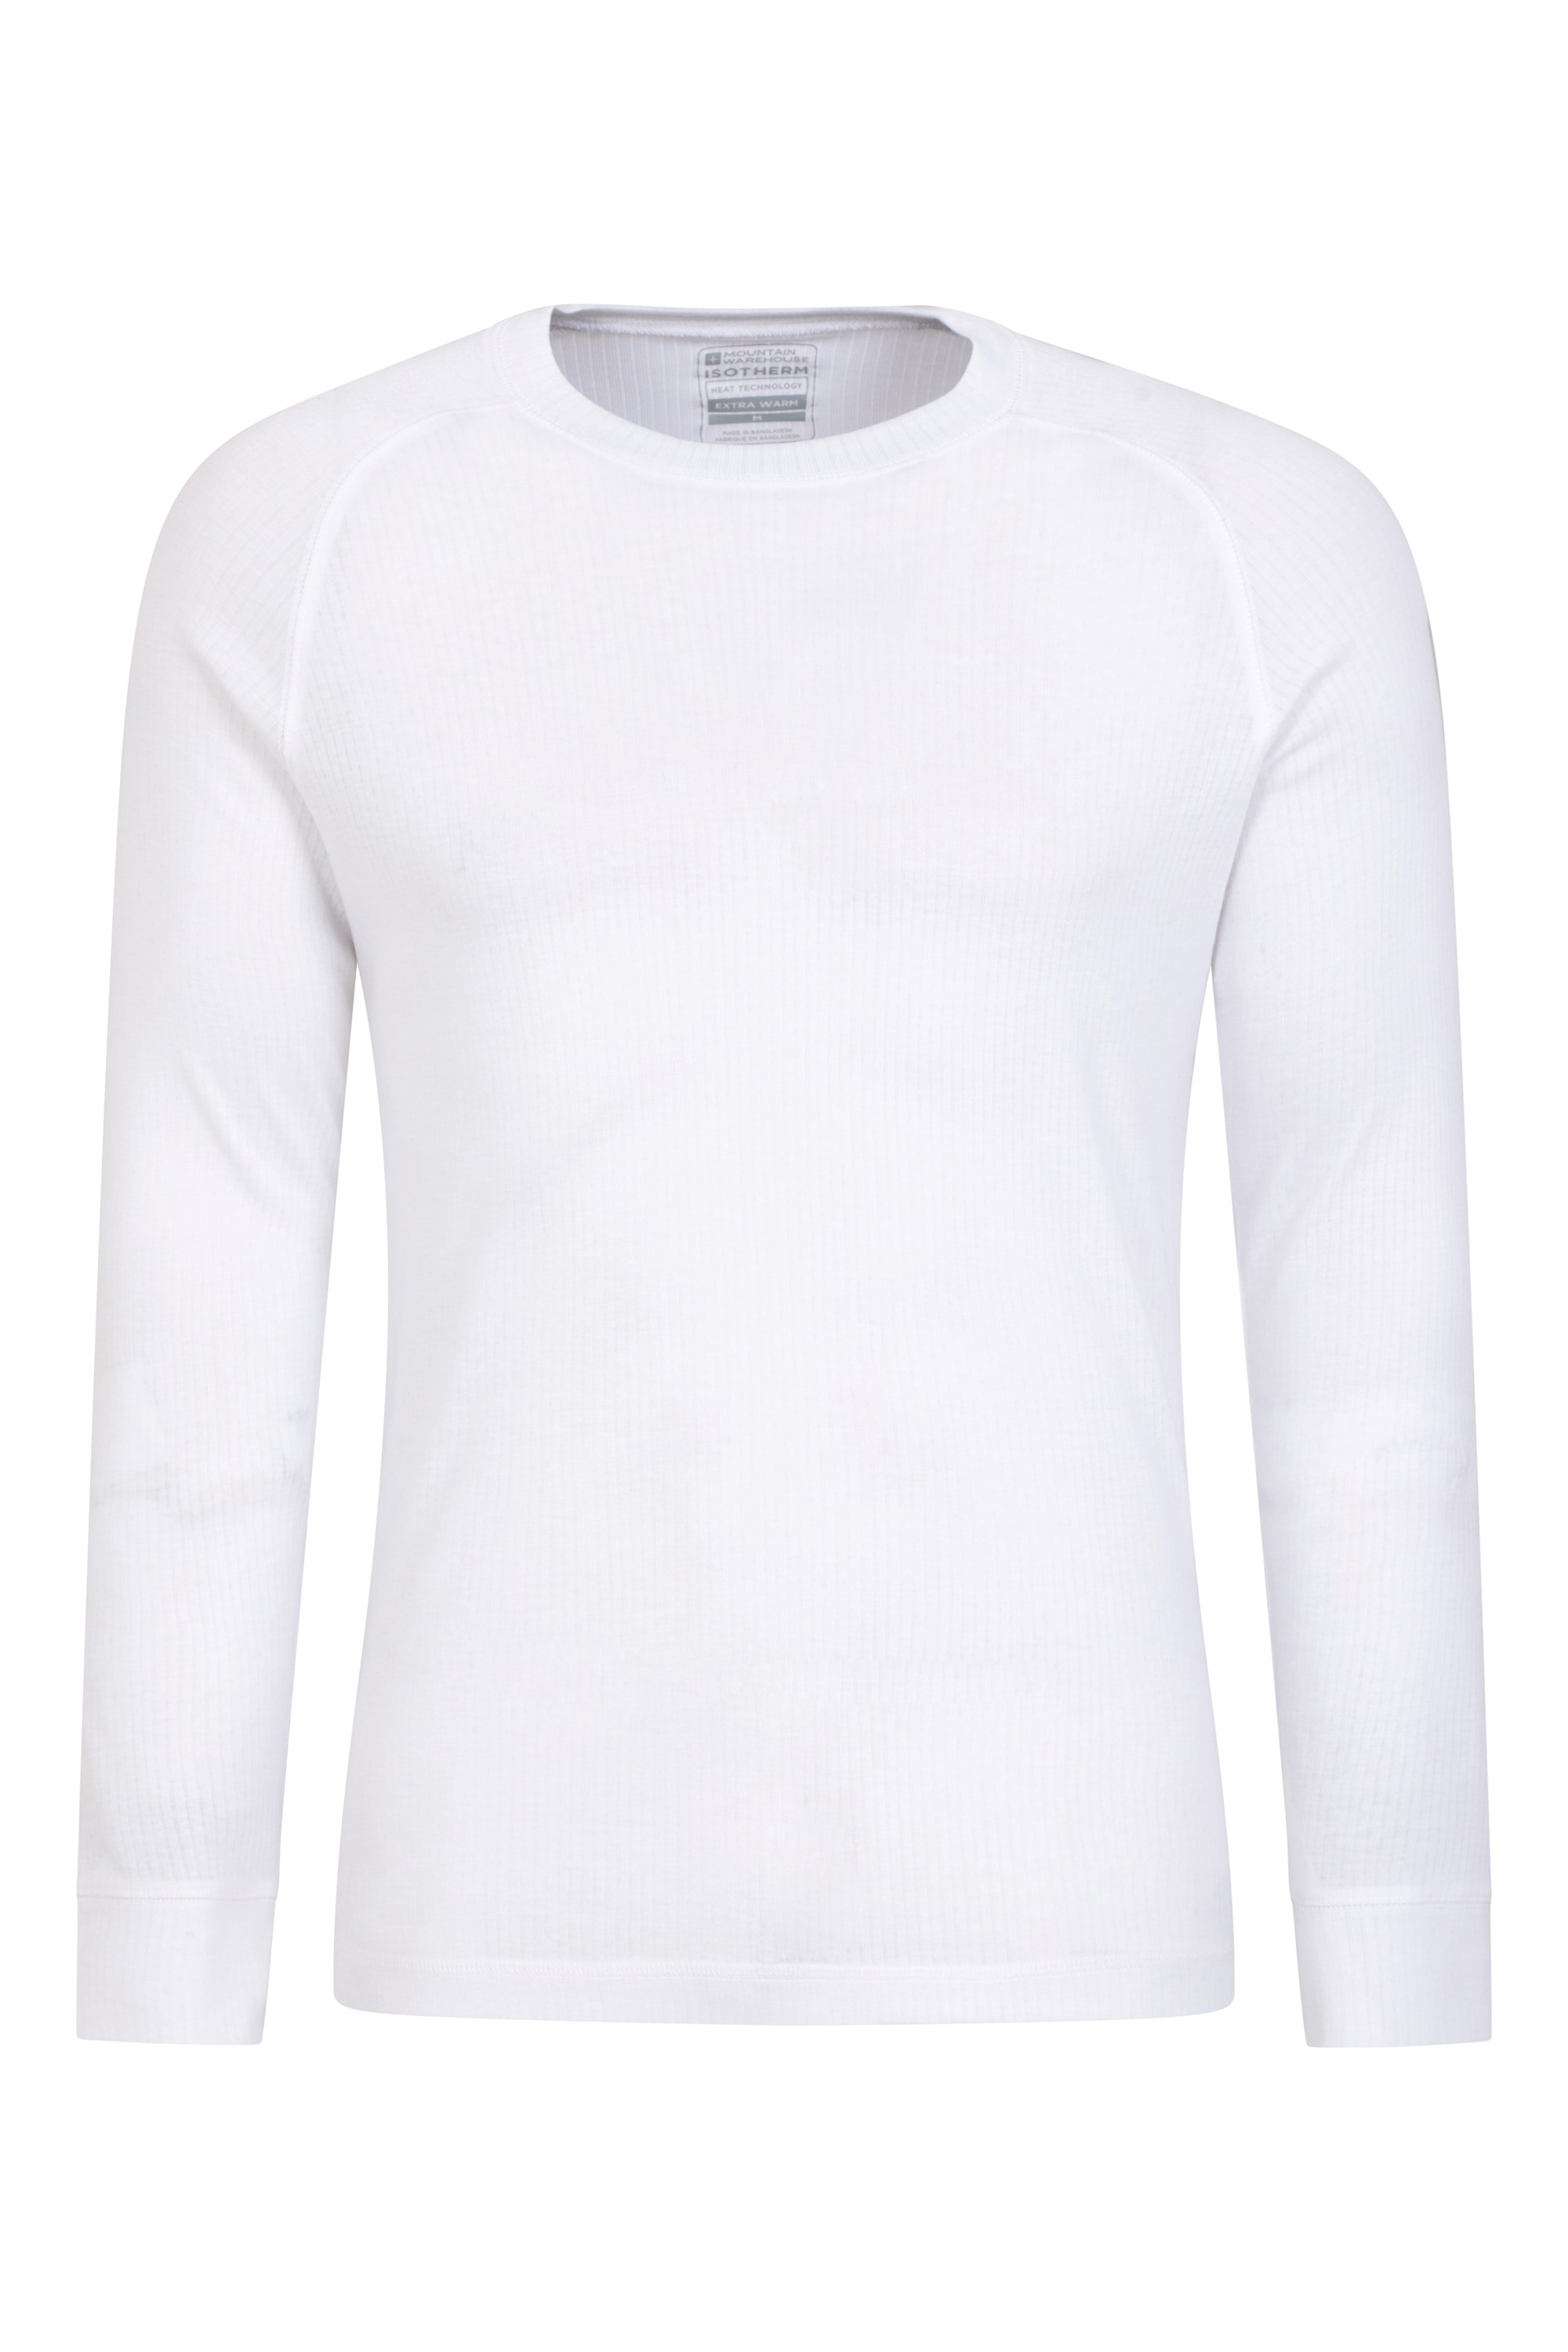 Talus Mens Long Sleeved Round Neck Top - White